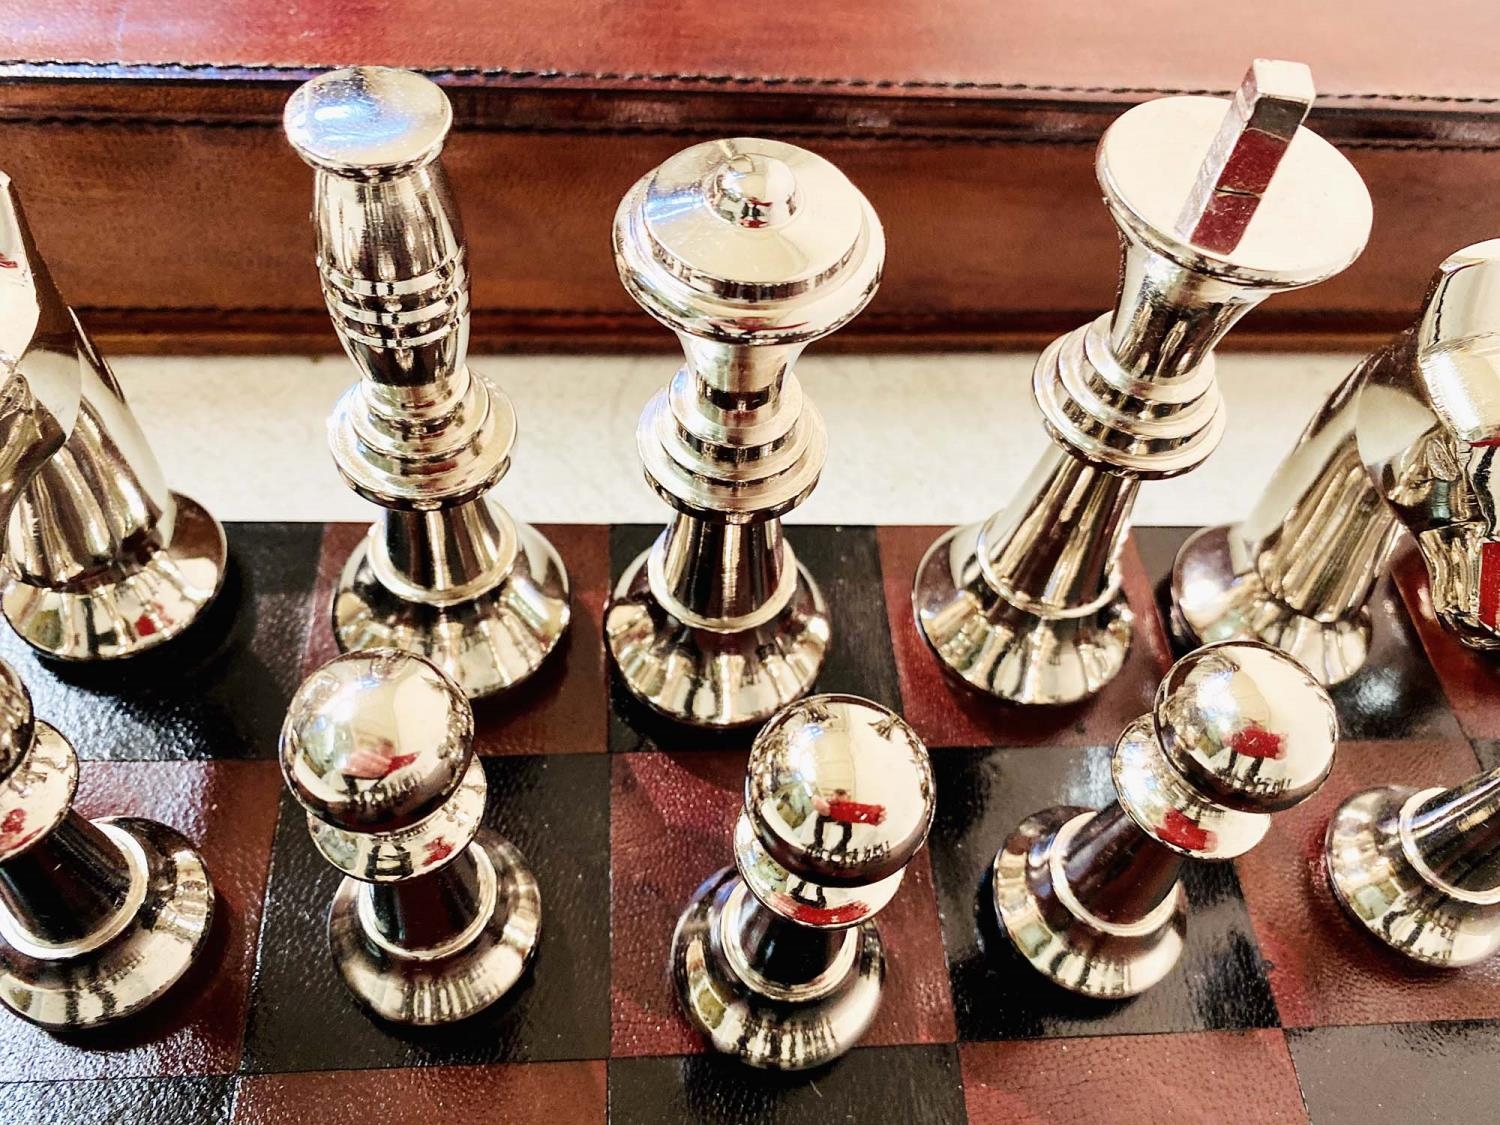 CHESS SET, IN LEATHERED CASE, 7cm x 43cm x 41cm. - Image 3 of 4